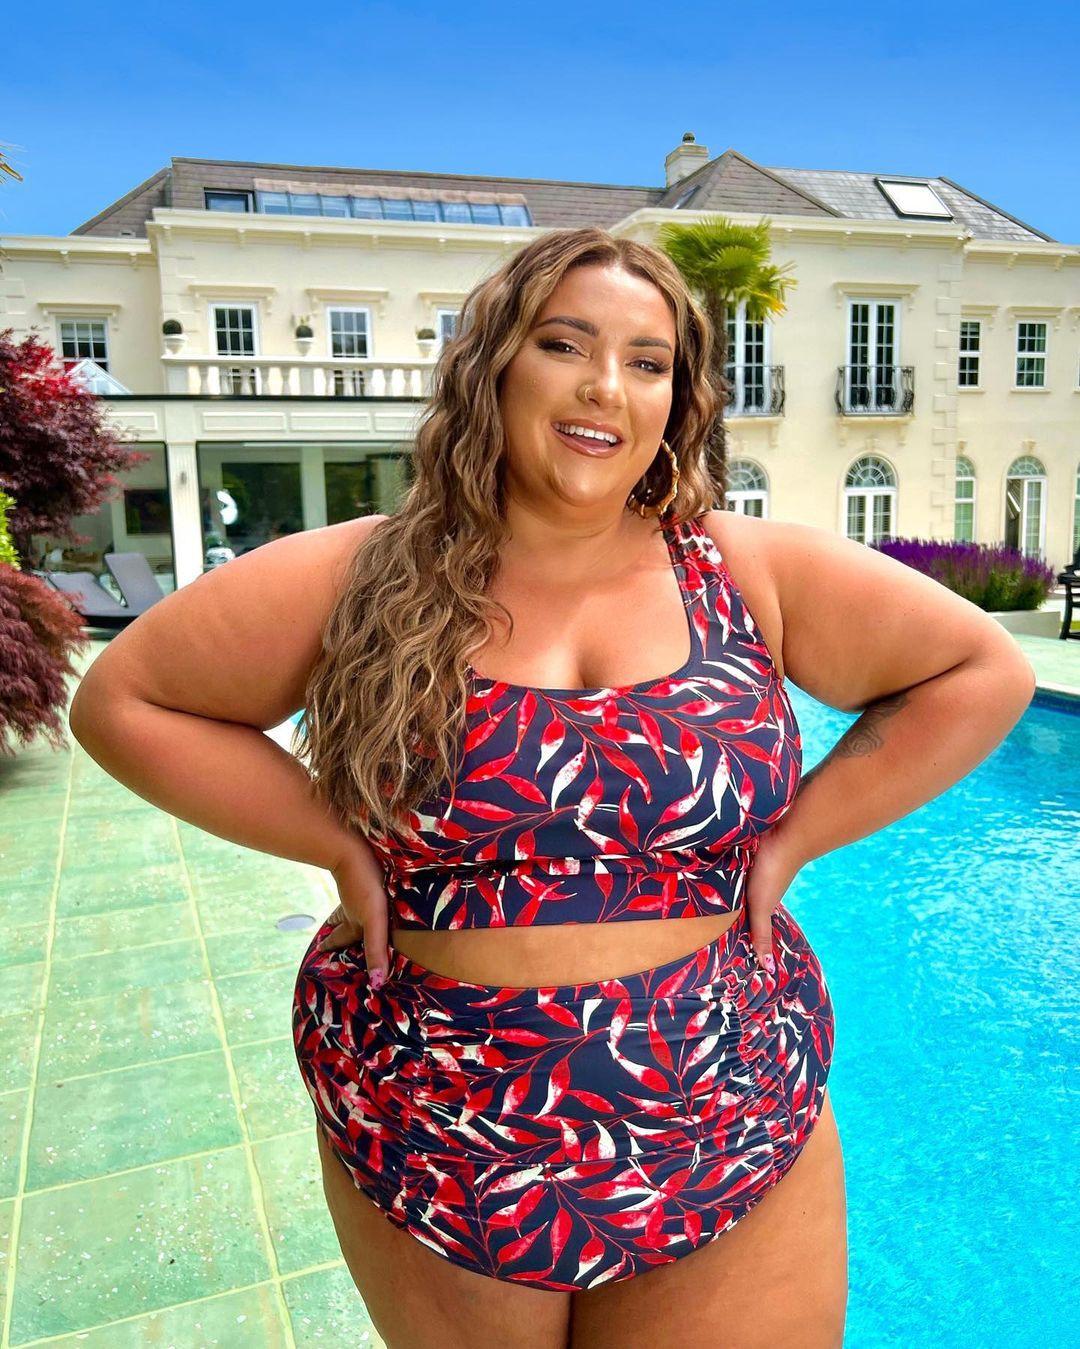 Body-Positive Influencers to Follow on Social MediaHelloGiggles